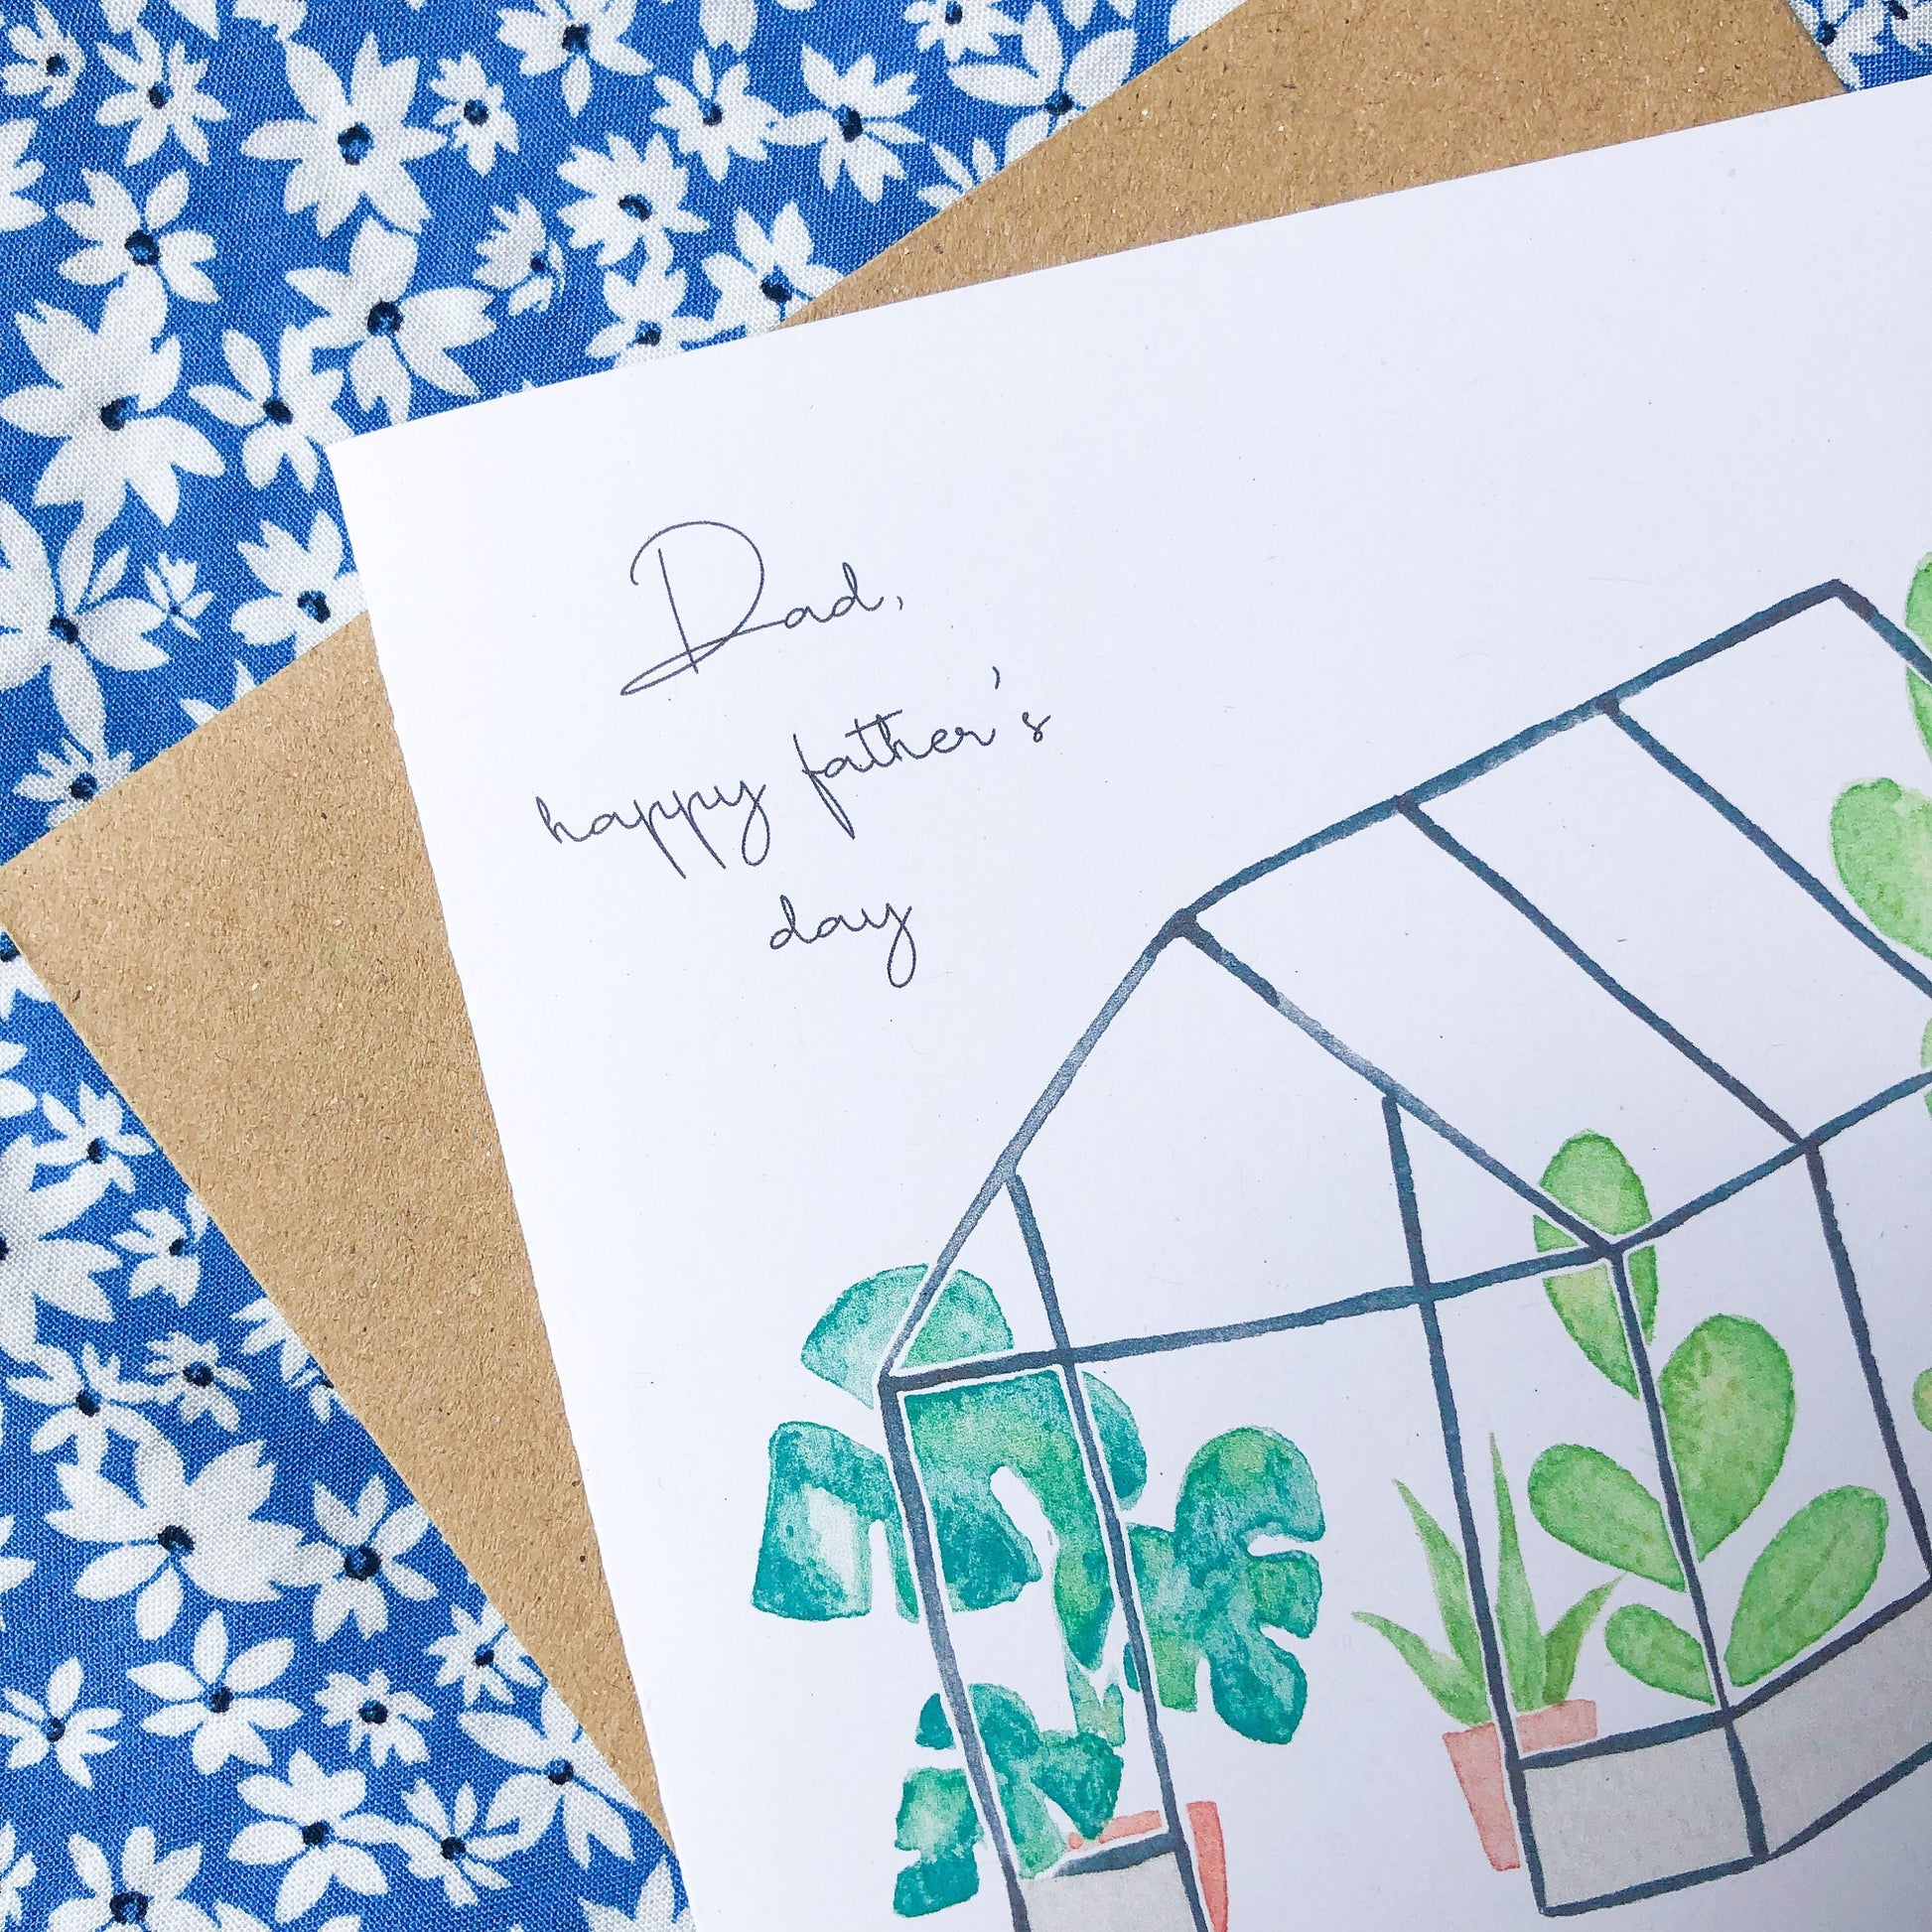 A square Father's Day card with a beautifully painted image of a tropical greenhouse, teeming with lush foliage and exotic blooms. The card also features the words "Dad Happy Father's Day" in an elegant cursive font, written in a contrasting colourful tone to the background painting. This card is a thoughtful and striking way to honour a special dad on his day, with the vibrant colours and intricate details of the painting adding to its unique appeal.